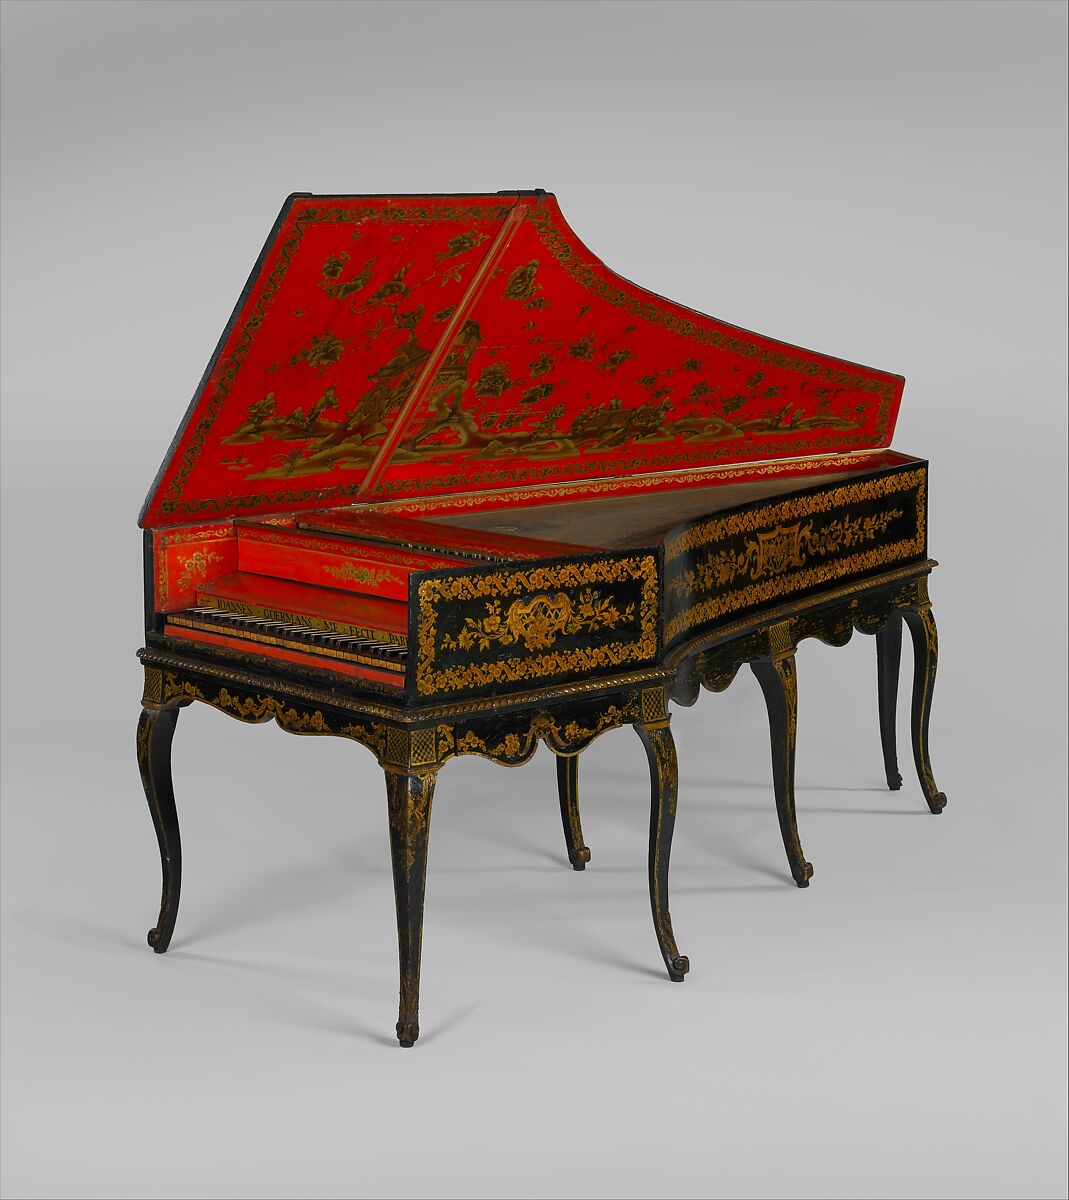 Harpsichord converted to a piano, Jean Goermans (Dutch, active France, Gelden, The Netherlands 1703–1777 Paris), Wood, paint, gilding, polychrome, gilded pewter, ebony, bone, felt, French 